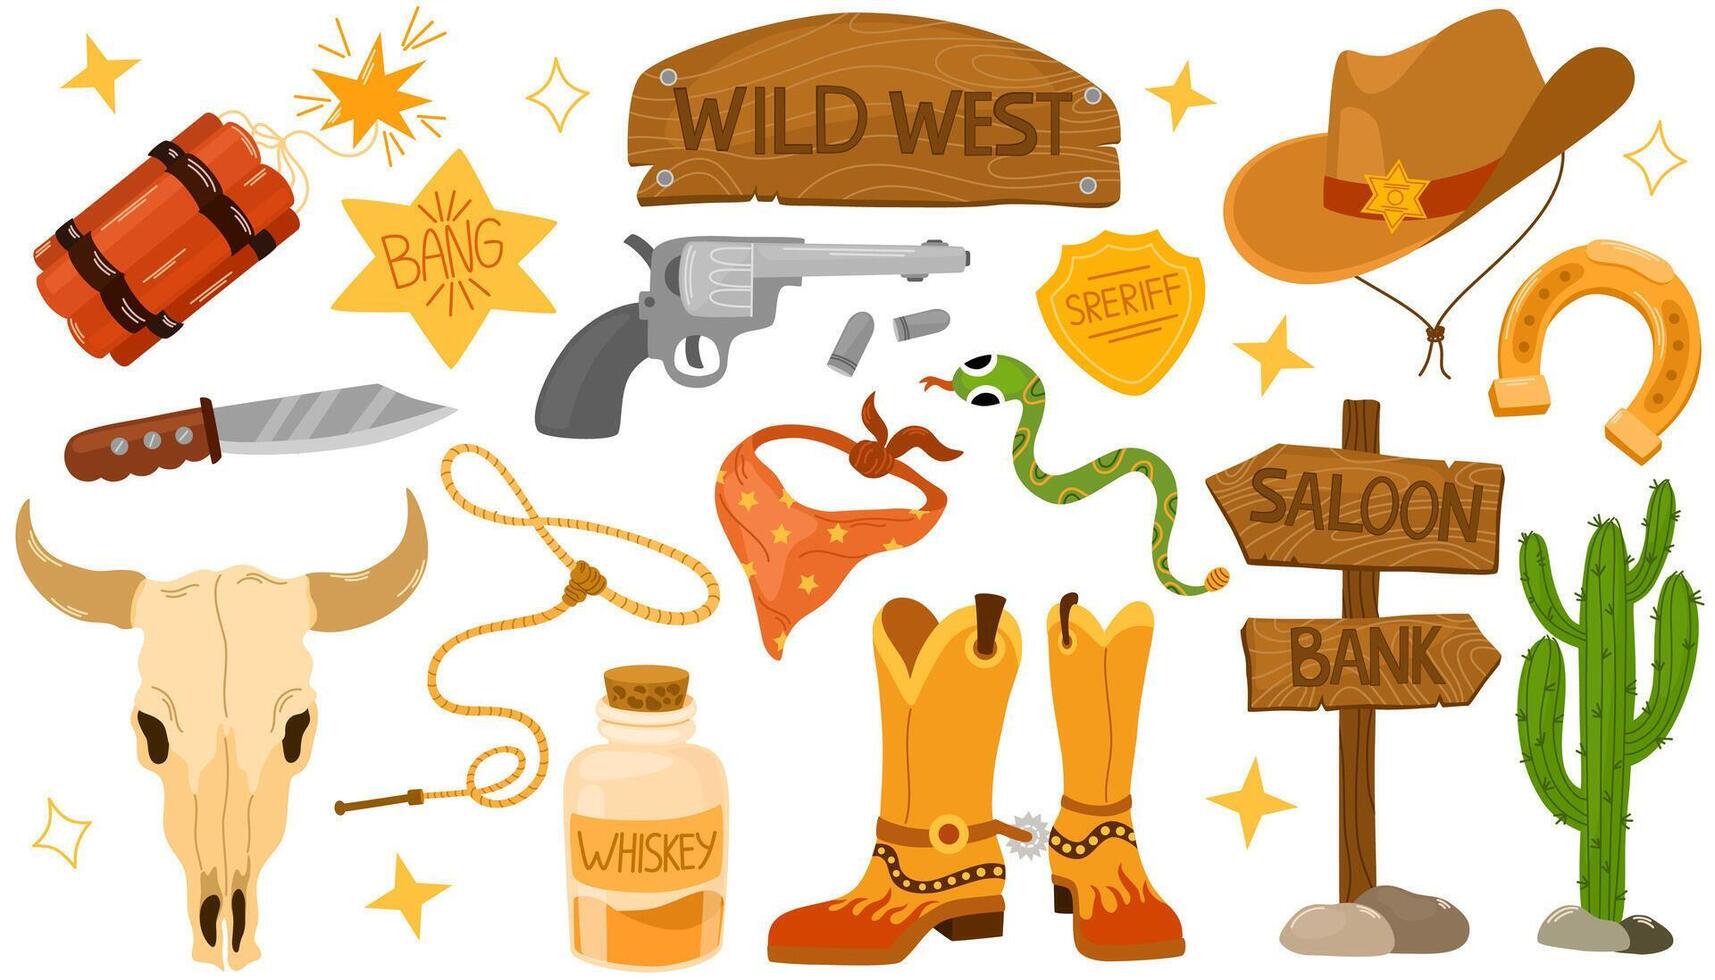 Wild west set. Flat design collection with Texas timber road sign, cowboy hat, boots, handgun, cactus, lasso, saloon signboard, cow skull, saddle. Vector hand draw illustration isolated